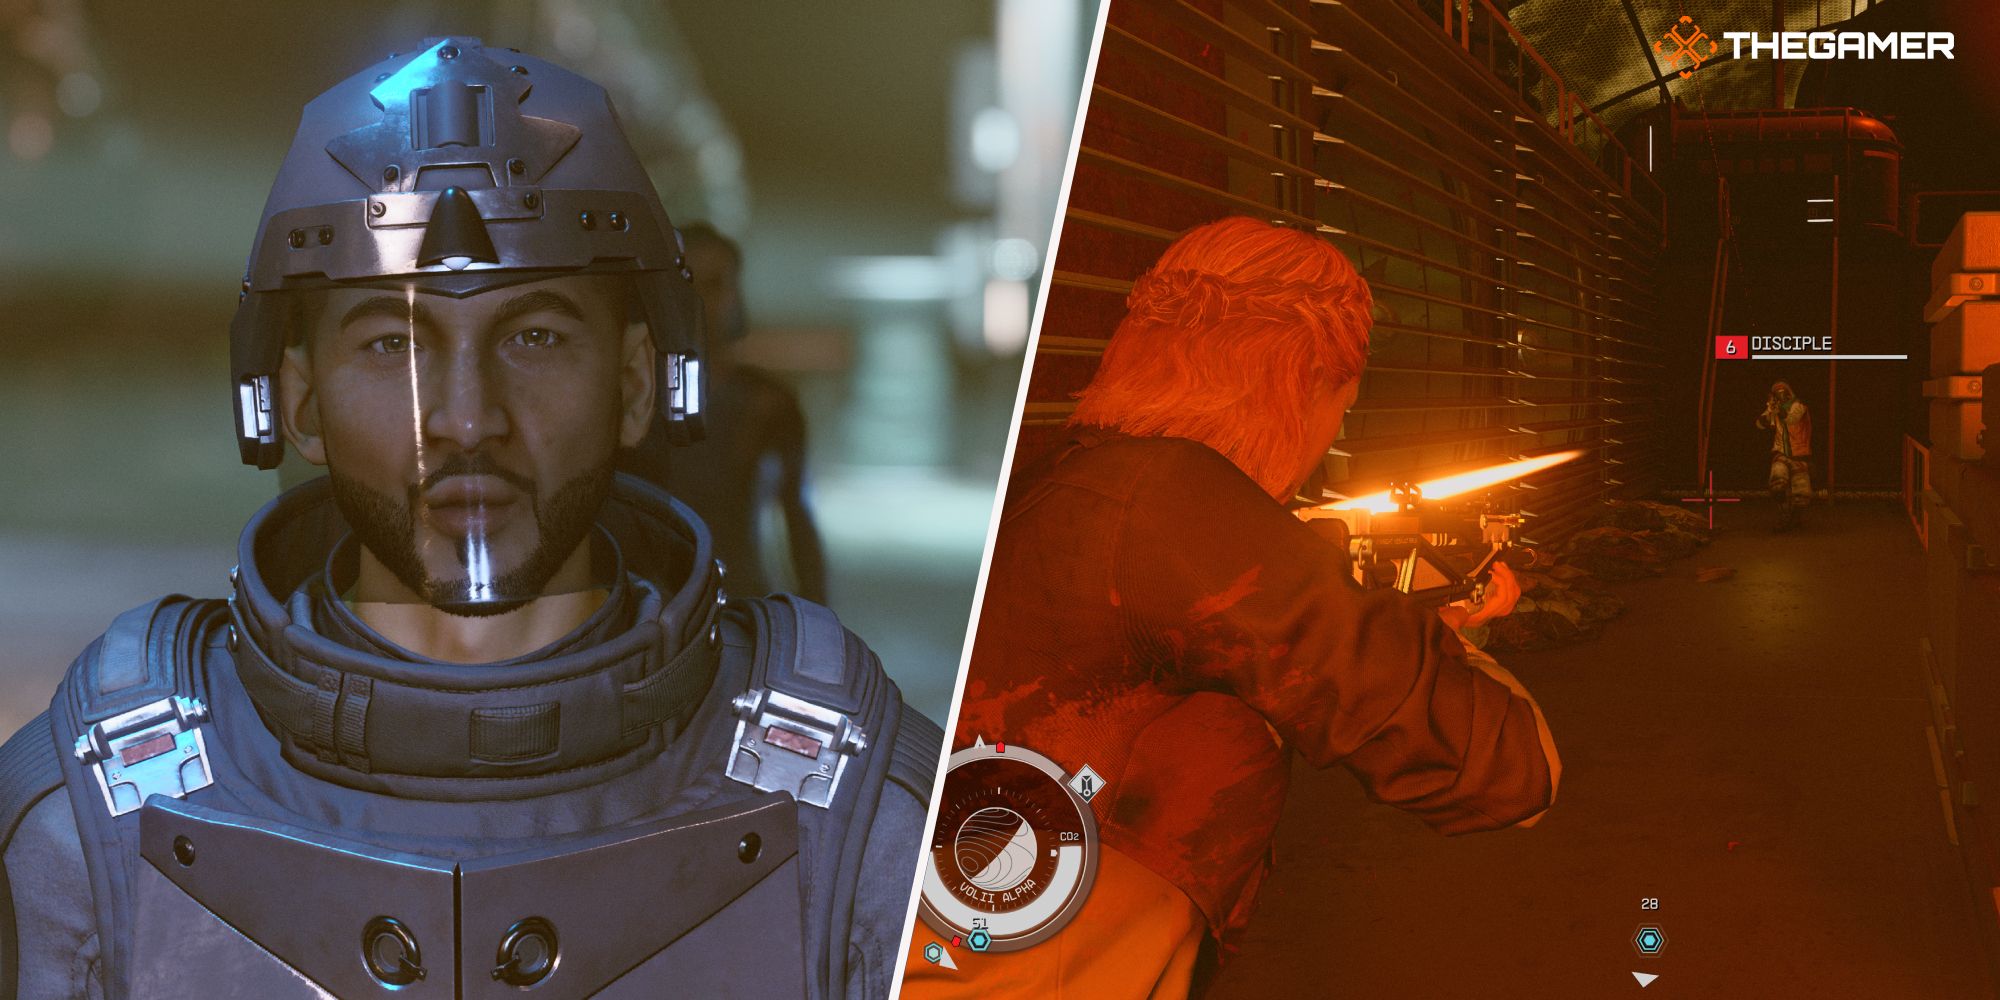 Starfield: Left: Neon security guard, Right: shooting at a Disciple.